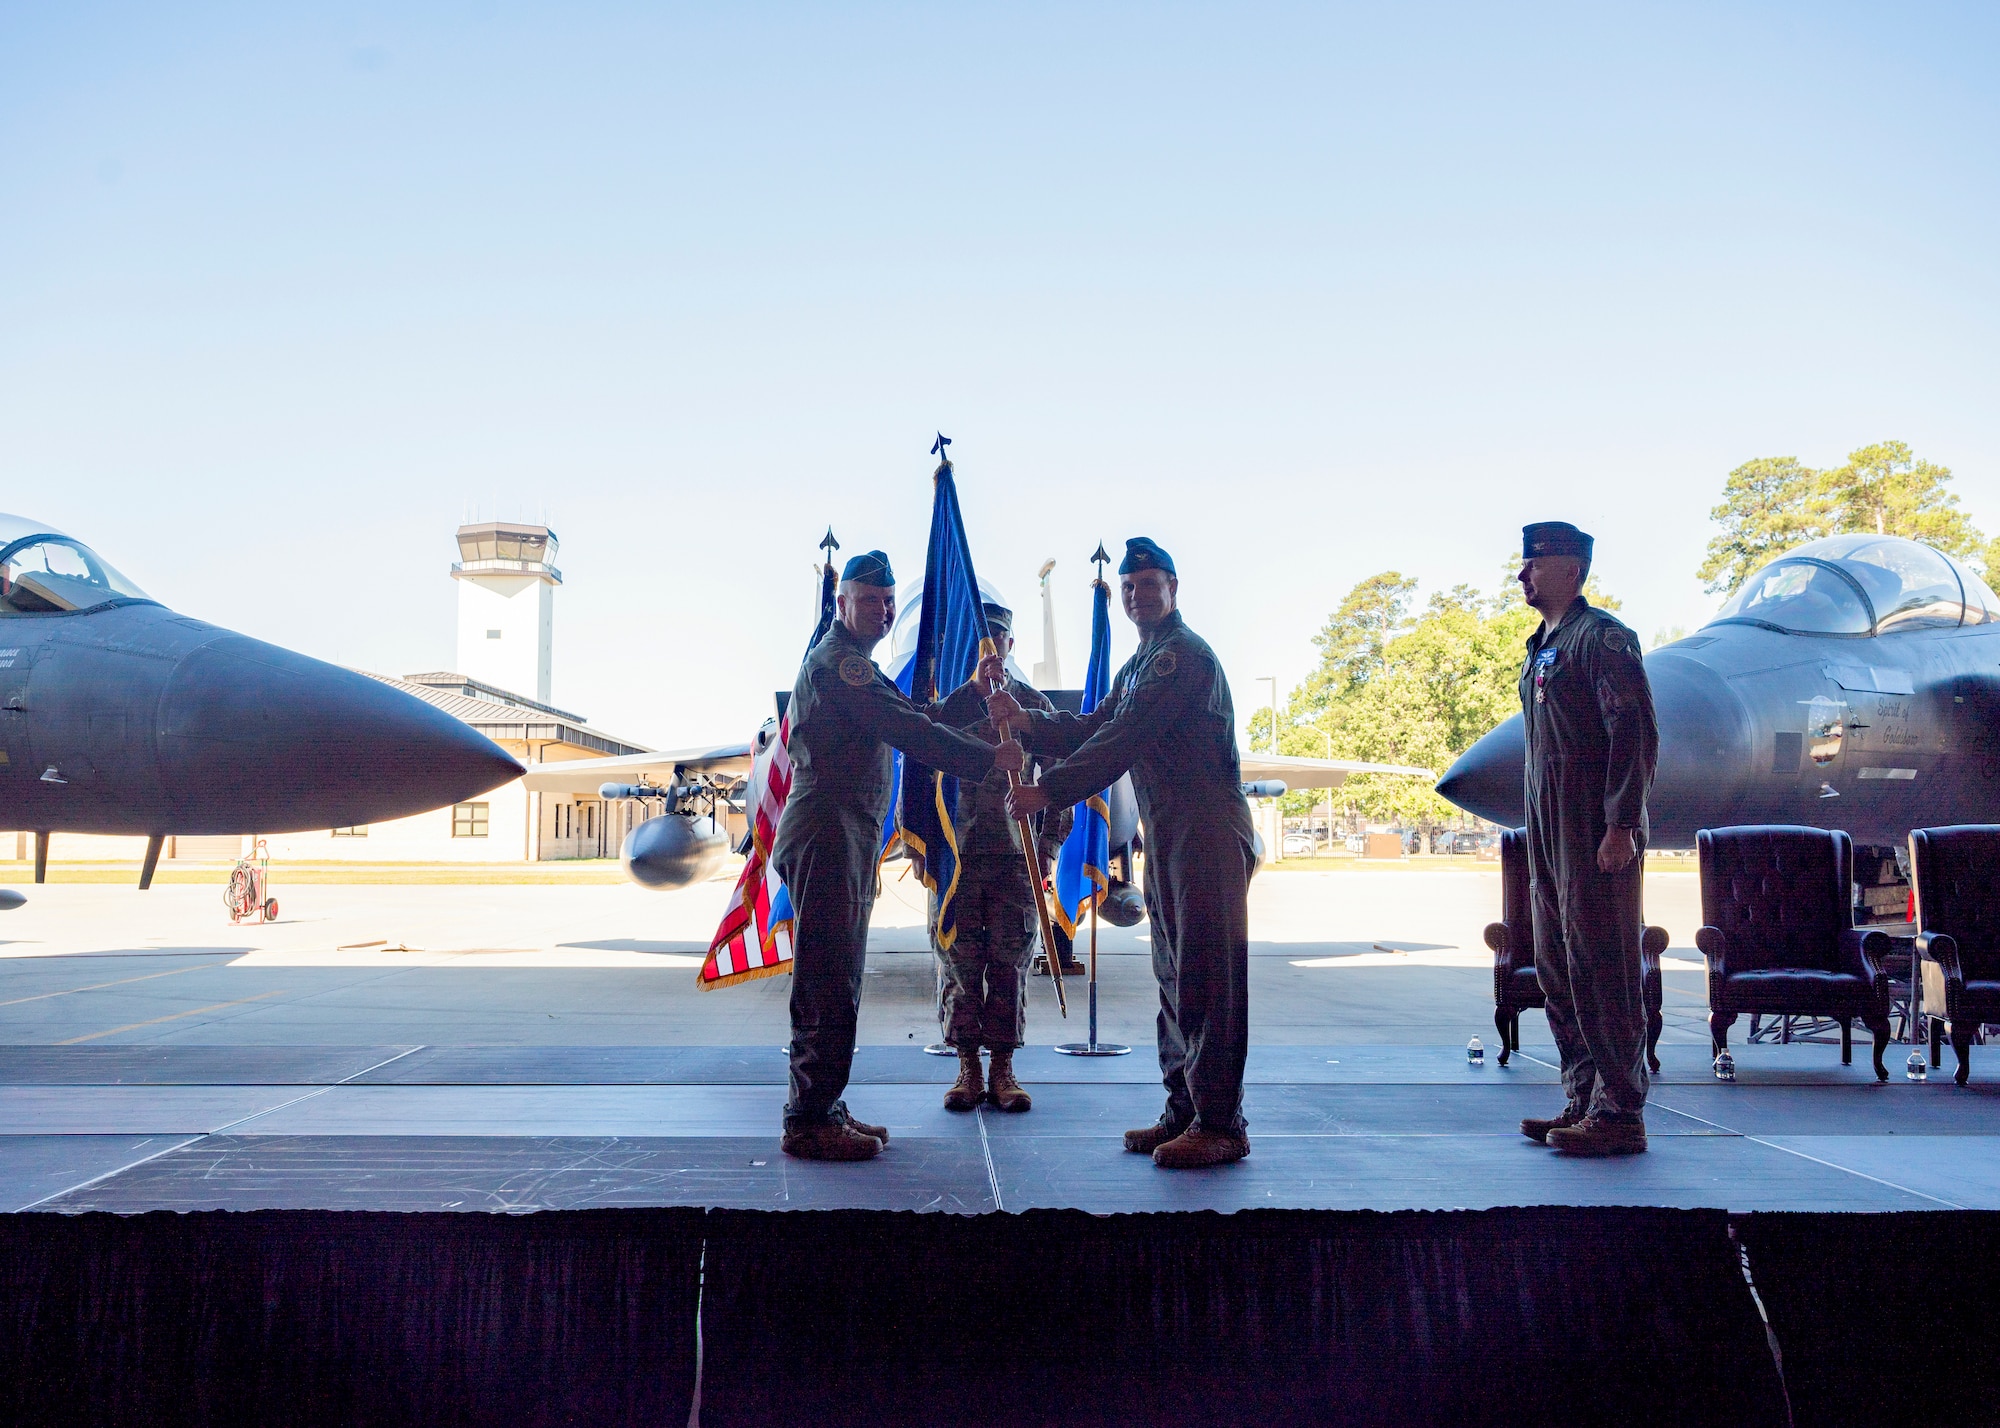 Maj. Gen. Michael G. Koscheski, left, Fifteenth Air Force commander, passes the guidon to Col. Lucas Teel, incoming 4th Fighter Wing commander, as he assumes command of the 4th FW during a Change of Command ceremony at Seymour Johnson Air Force Base, North Carolina, May 11, 2022. Prior to assuming command of the 4th FW, Teel was the vice commander of the 366th FW at Mountain Home AFB, Idaho. (U.S. Air Force photo by Senior Airman Kimberly Barrera)